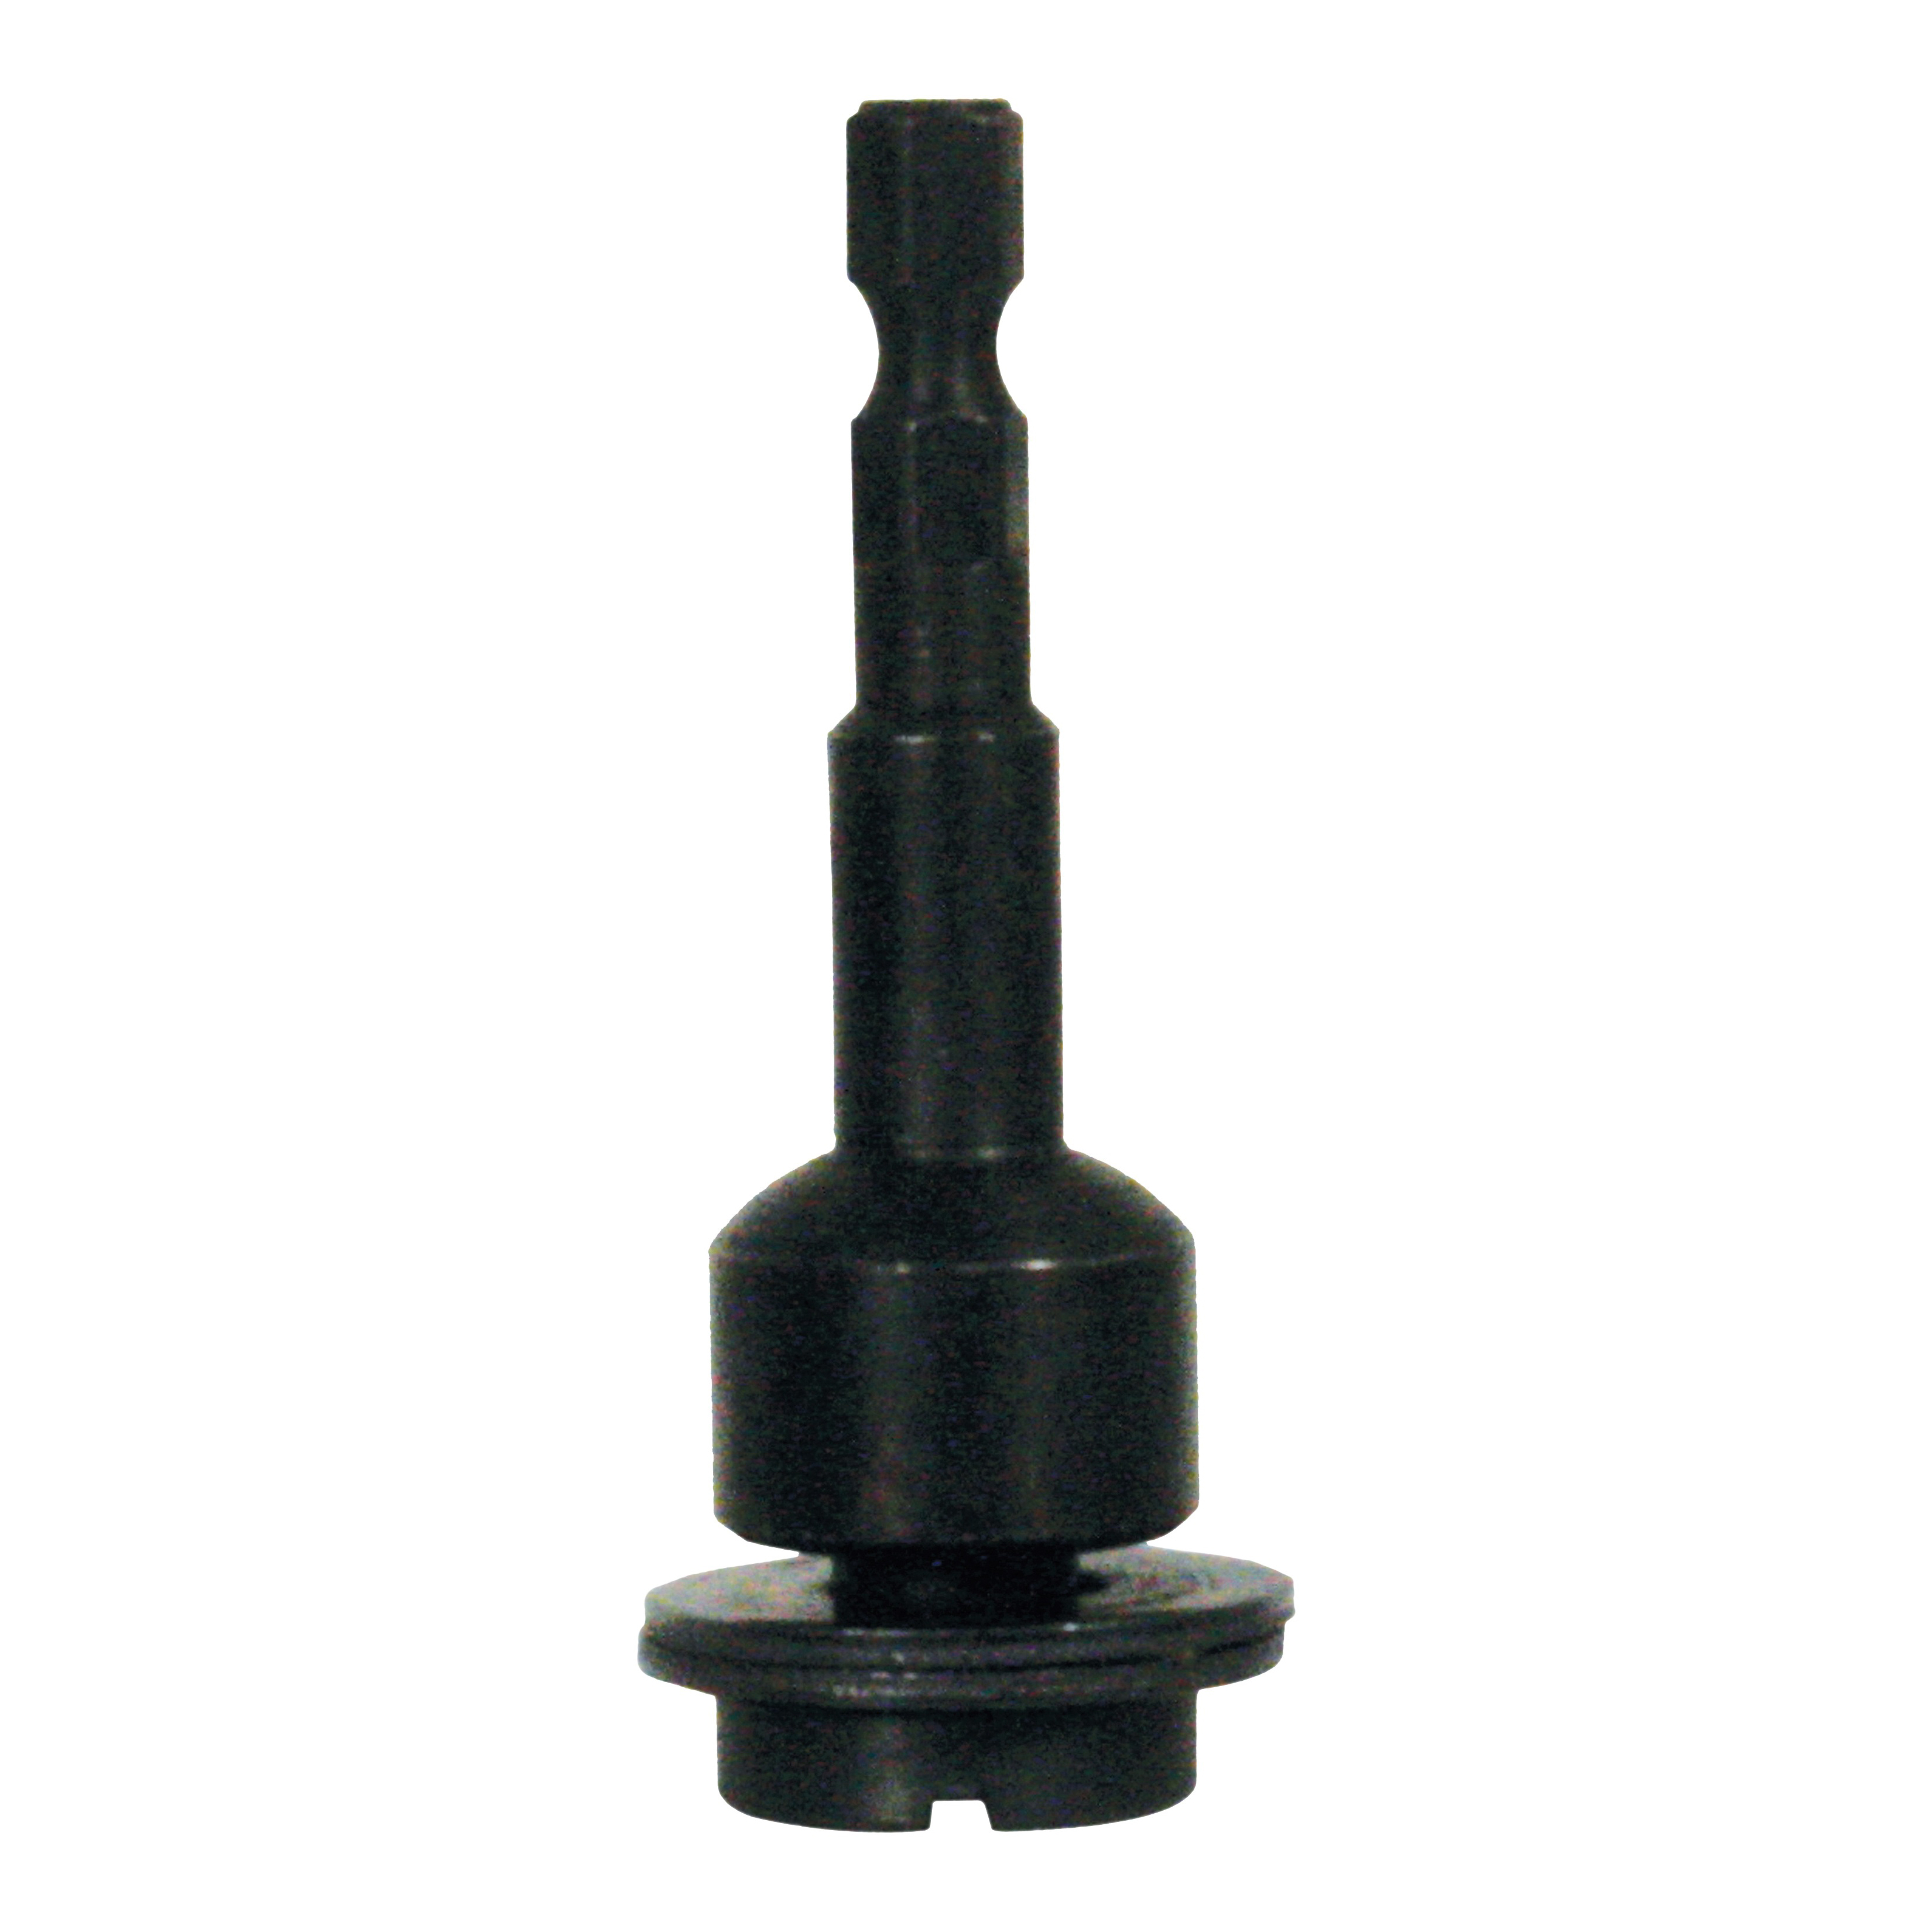 PBM030MAND01F Mandrel, For: 2 in, 3 in Bonded Discs and Standard Drills